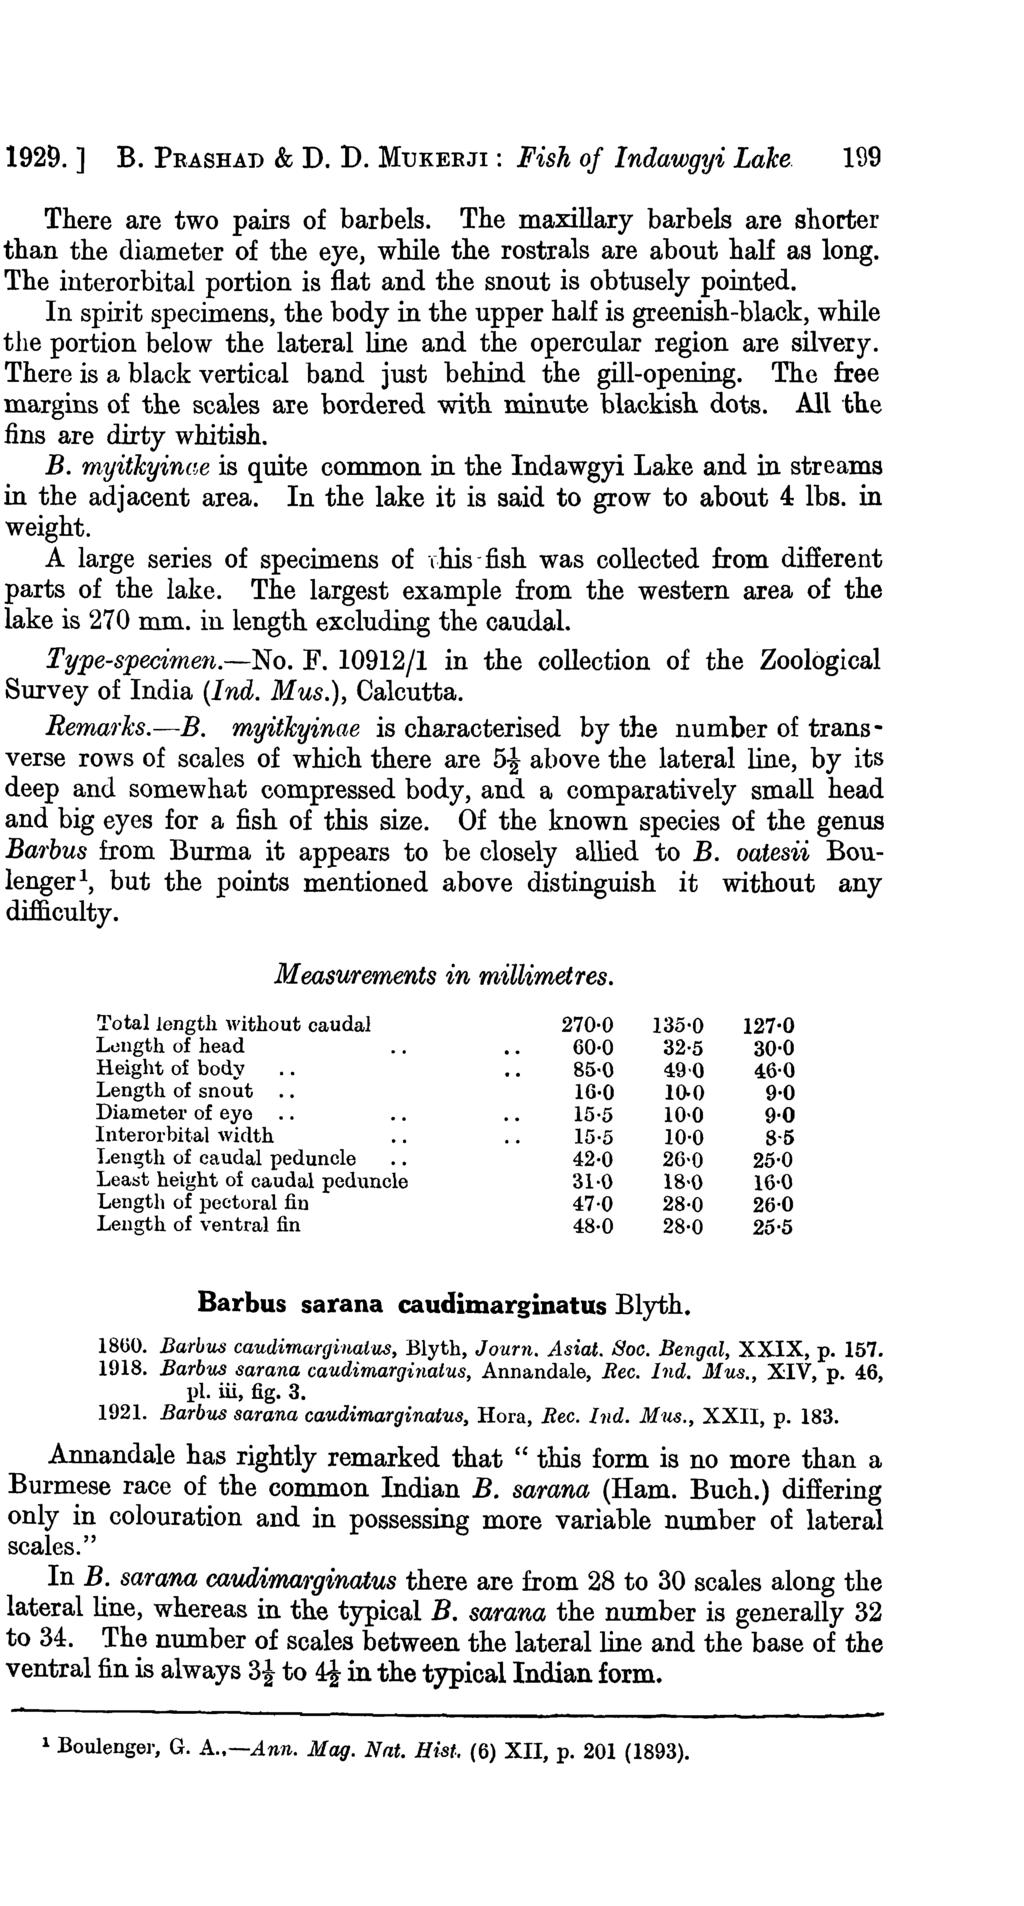 1929.] B. PRASHAD & D. D. MUKERJI: Fish of Indawgyi Lake. 199 There are two pairs of barbels. The maxillary barbels are shorter than the diameter of the eye, while the rostrals are about half as long.